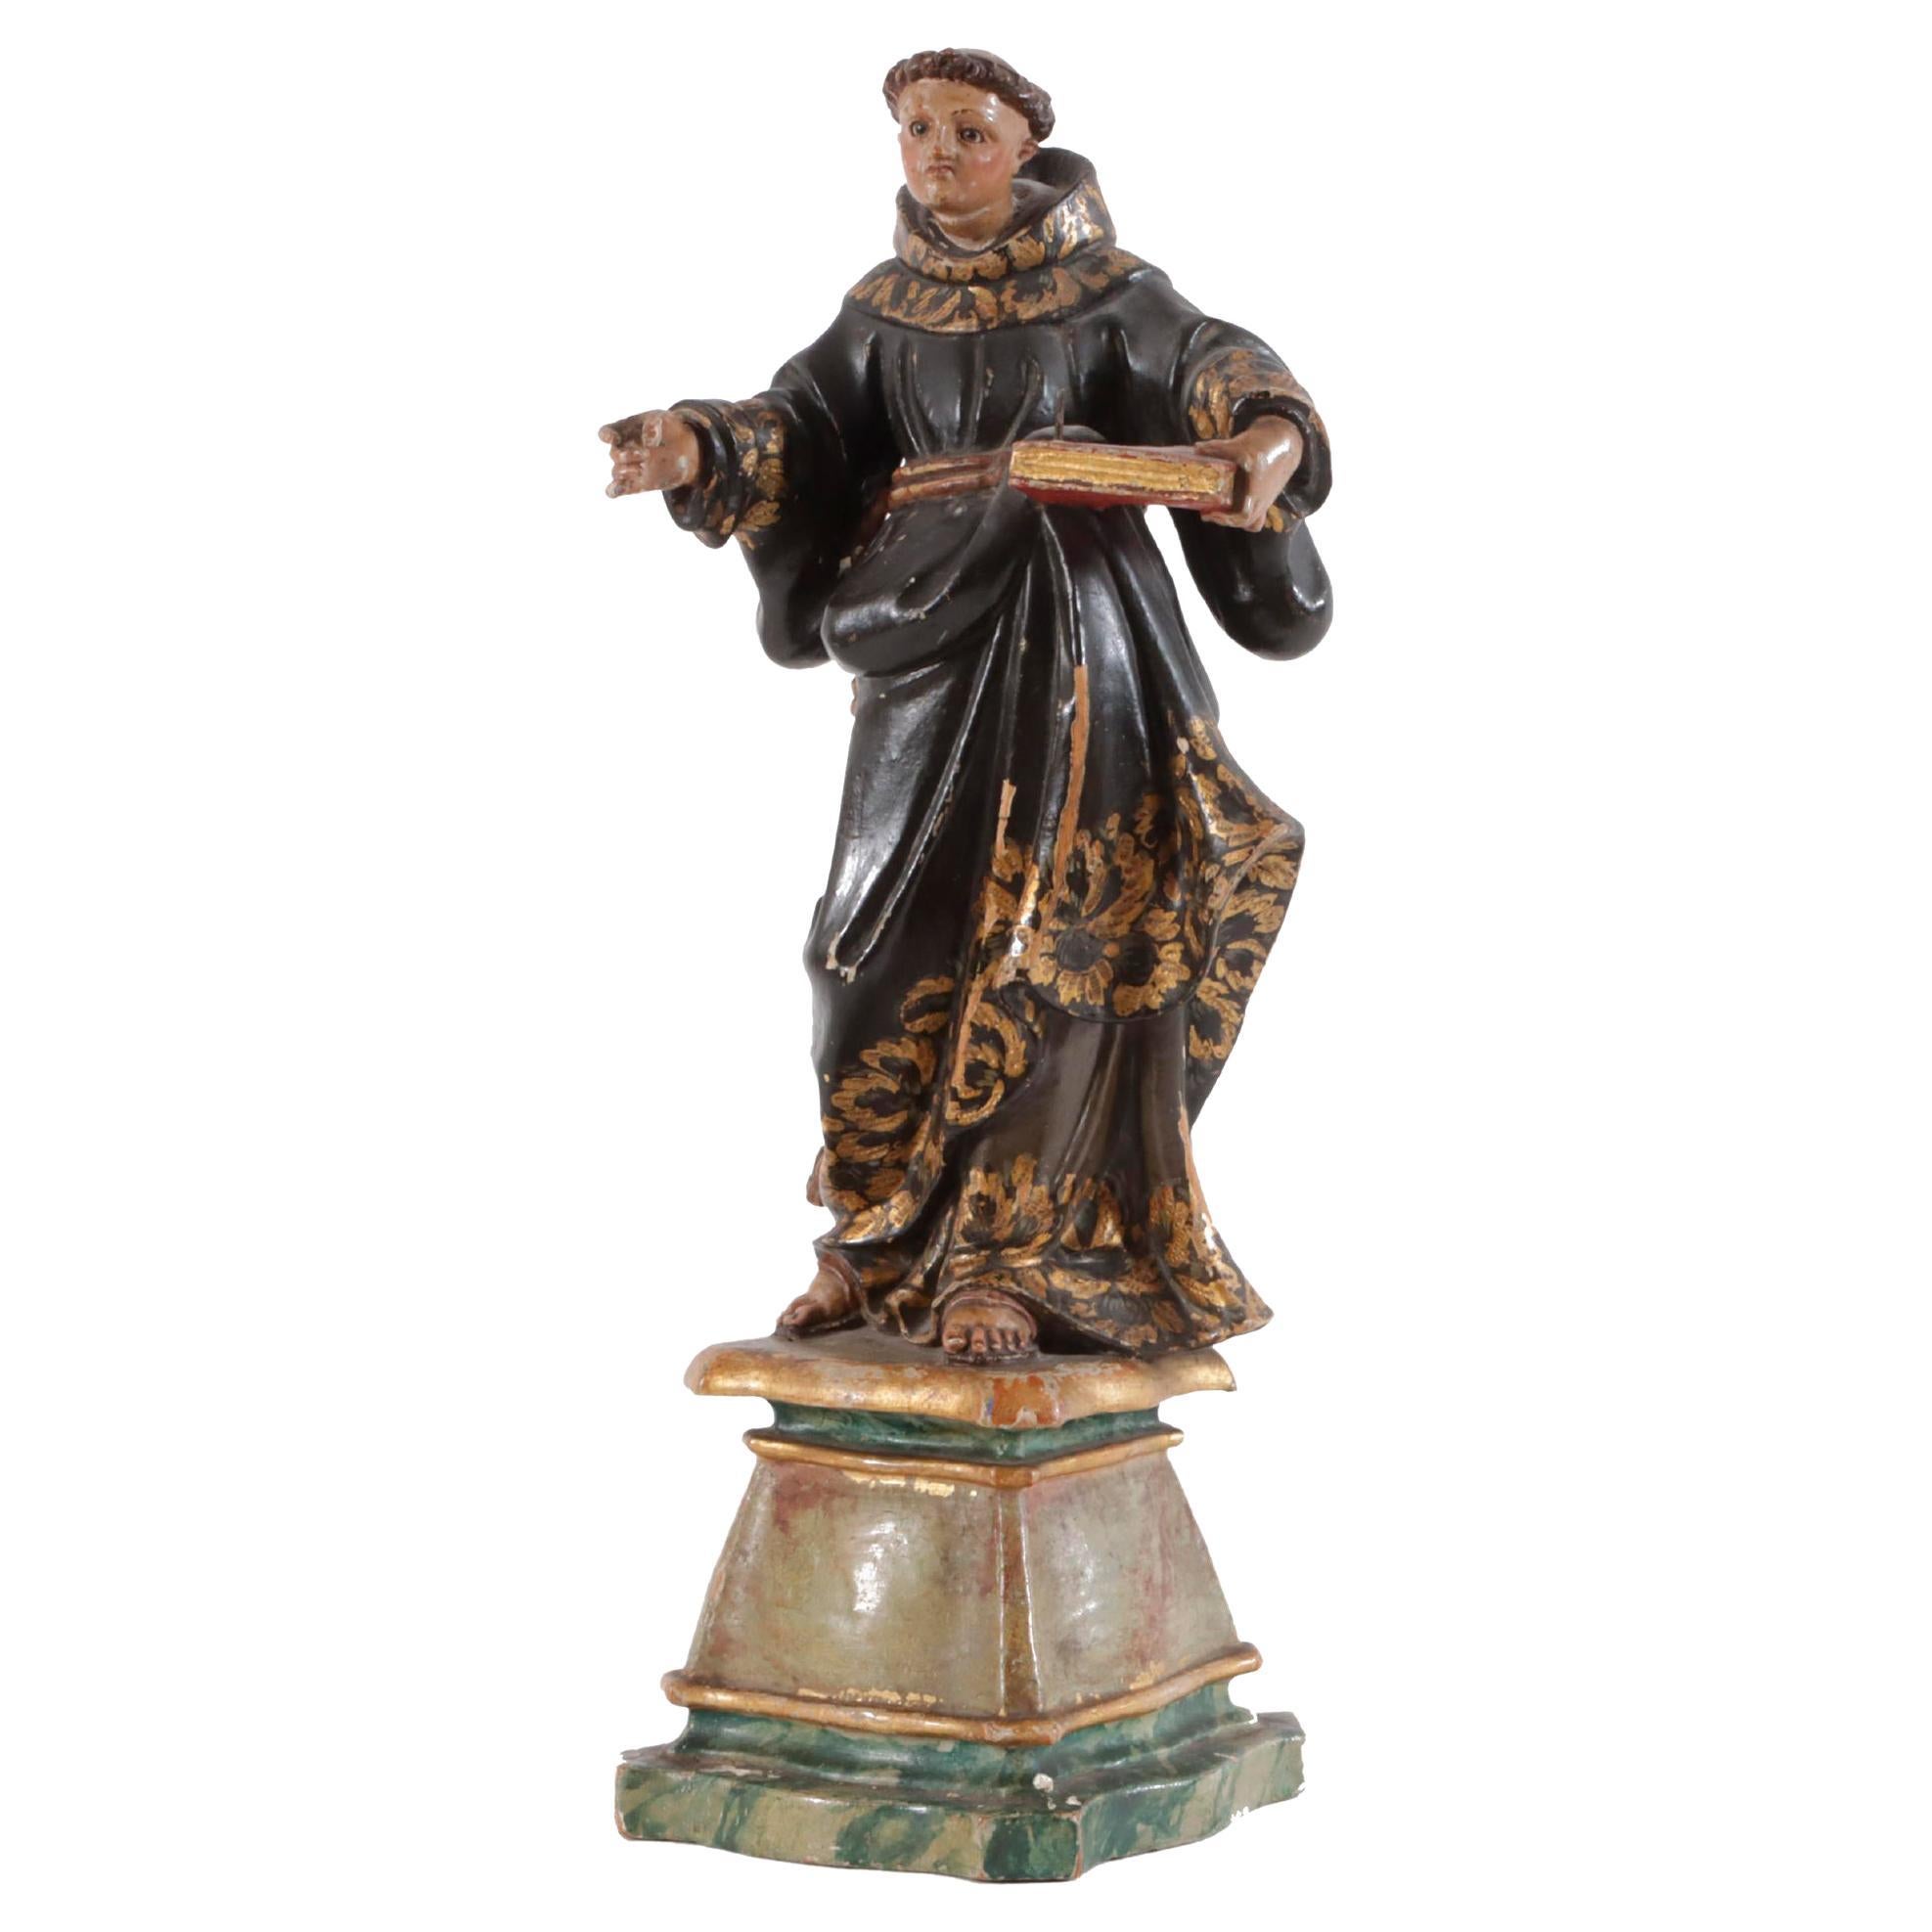 Carved and Painted Wood Sculpture Preaching Monk, Spanish 18th Century